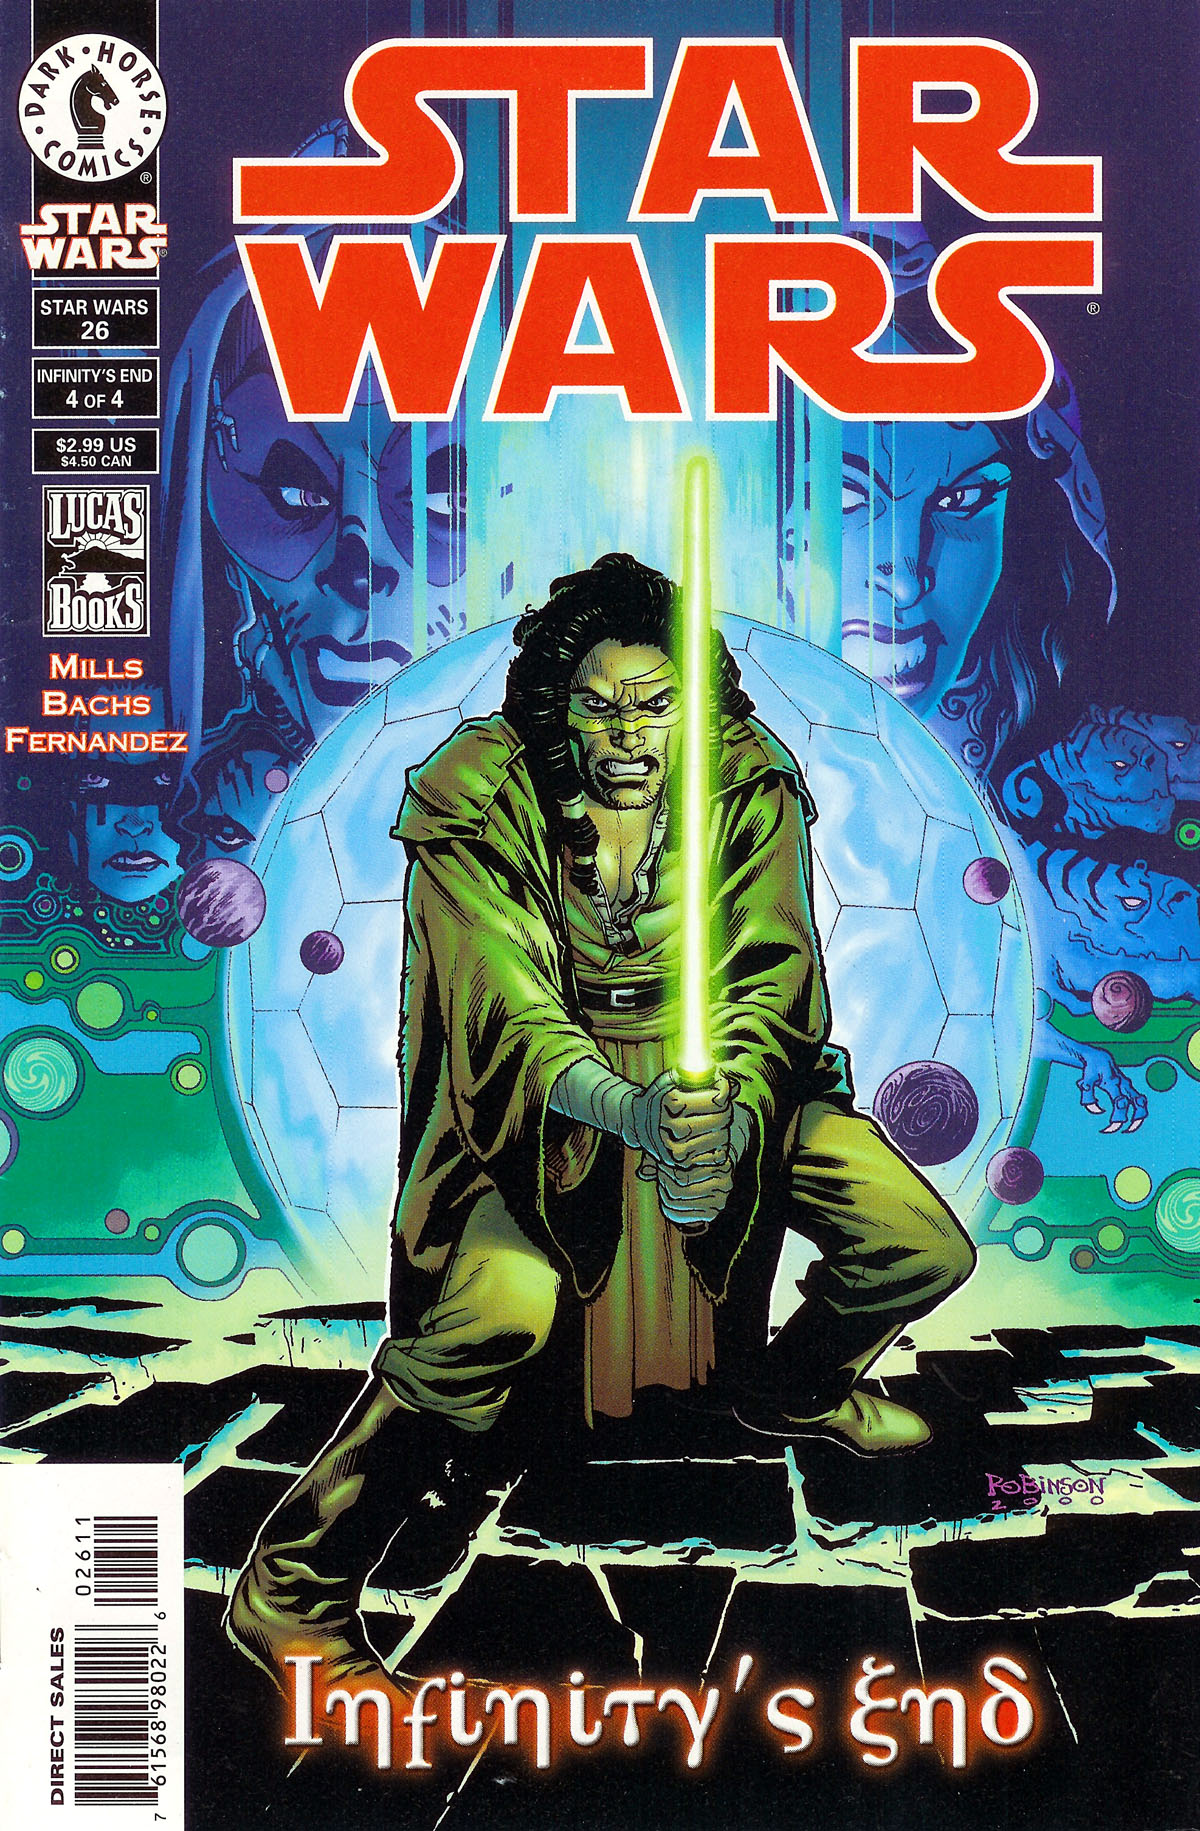 Star Wars 26: Infinity's End, Part 4